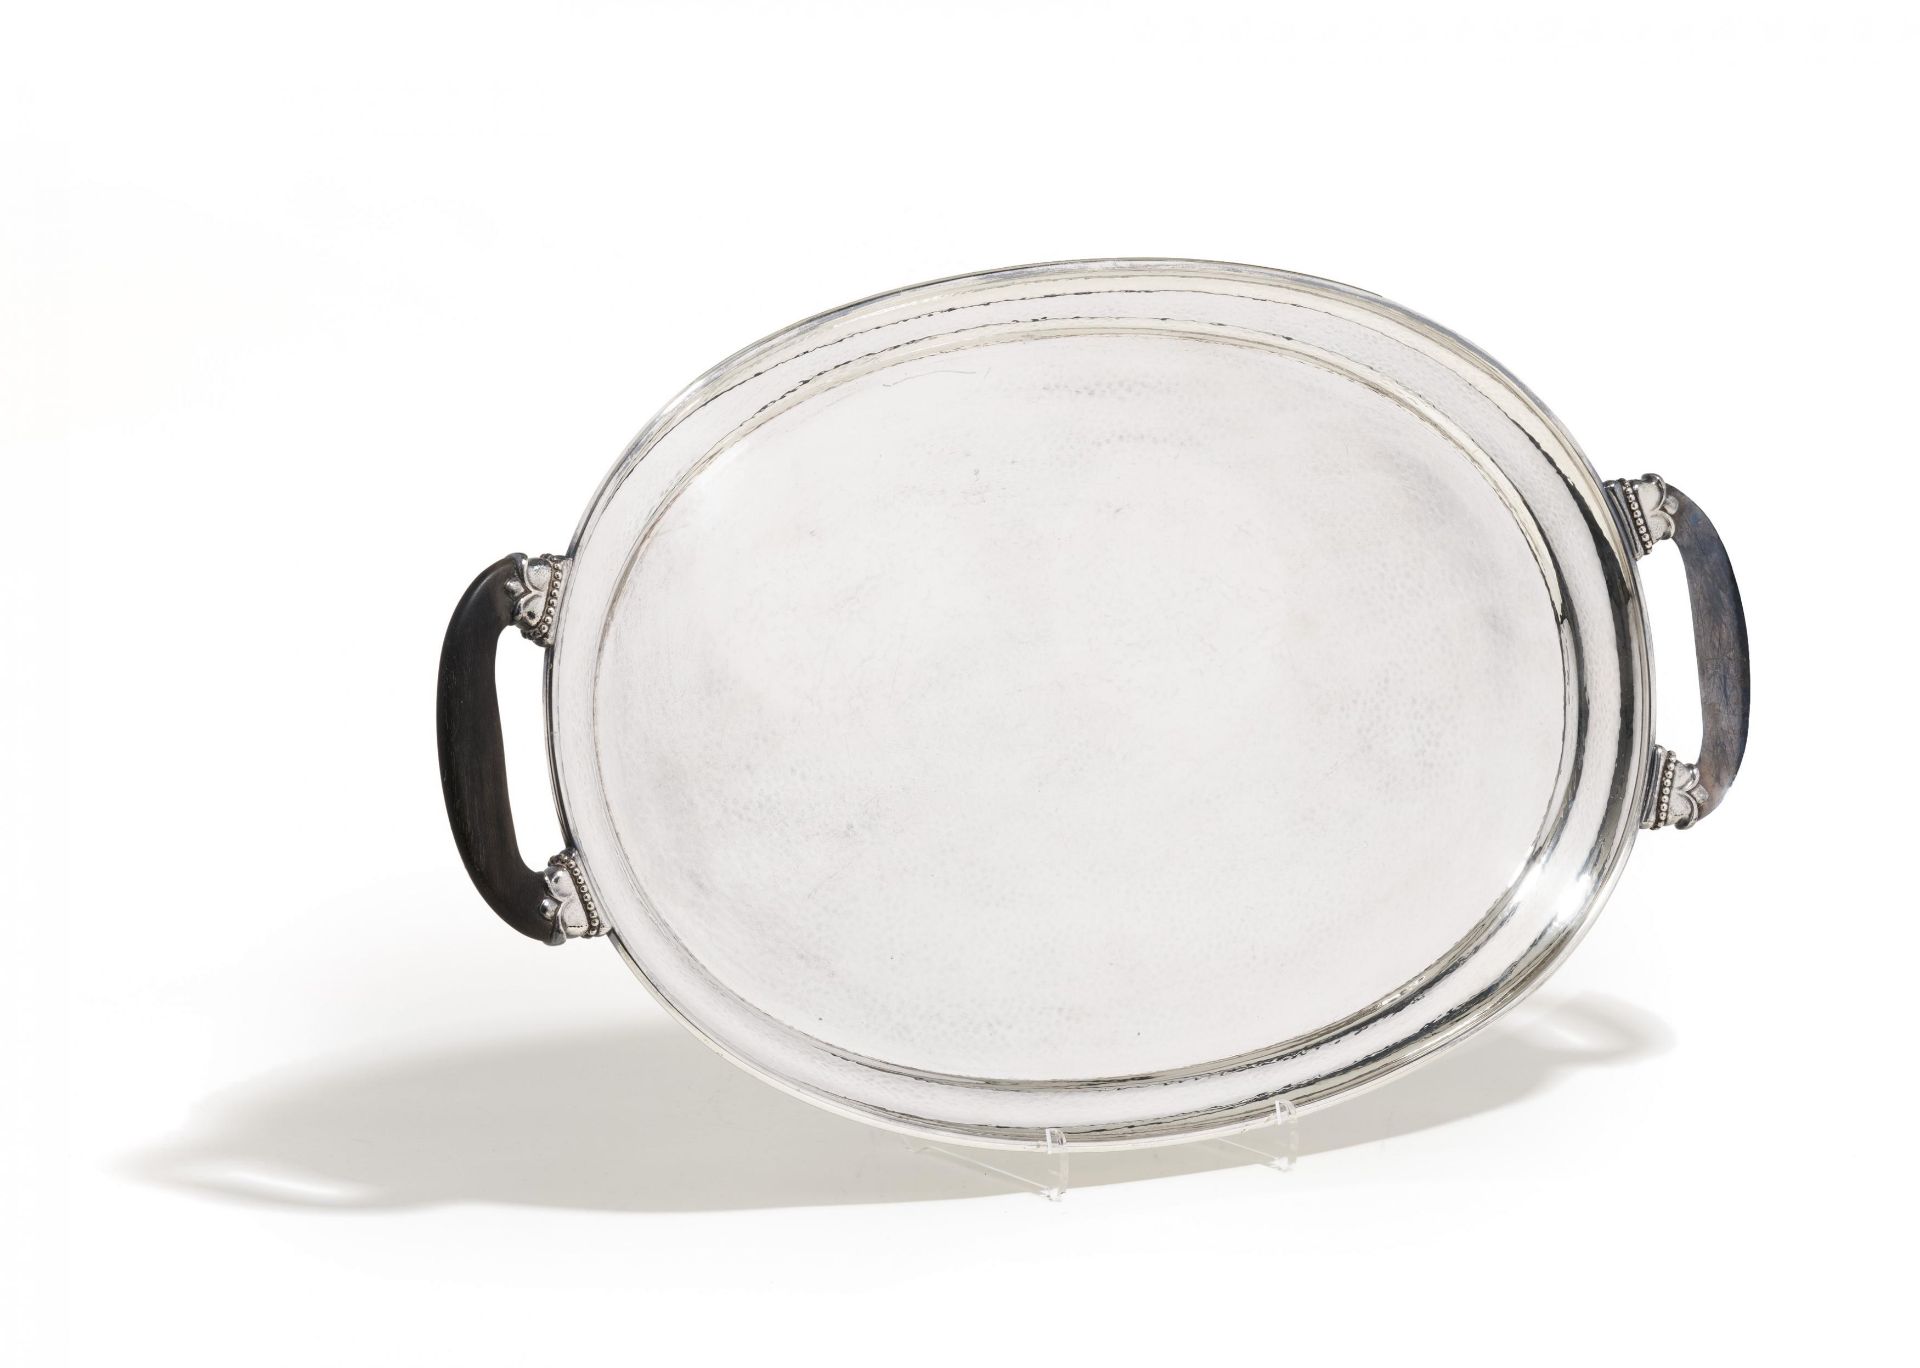 Large oval tray made of silver and wood